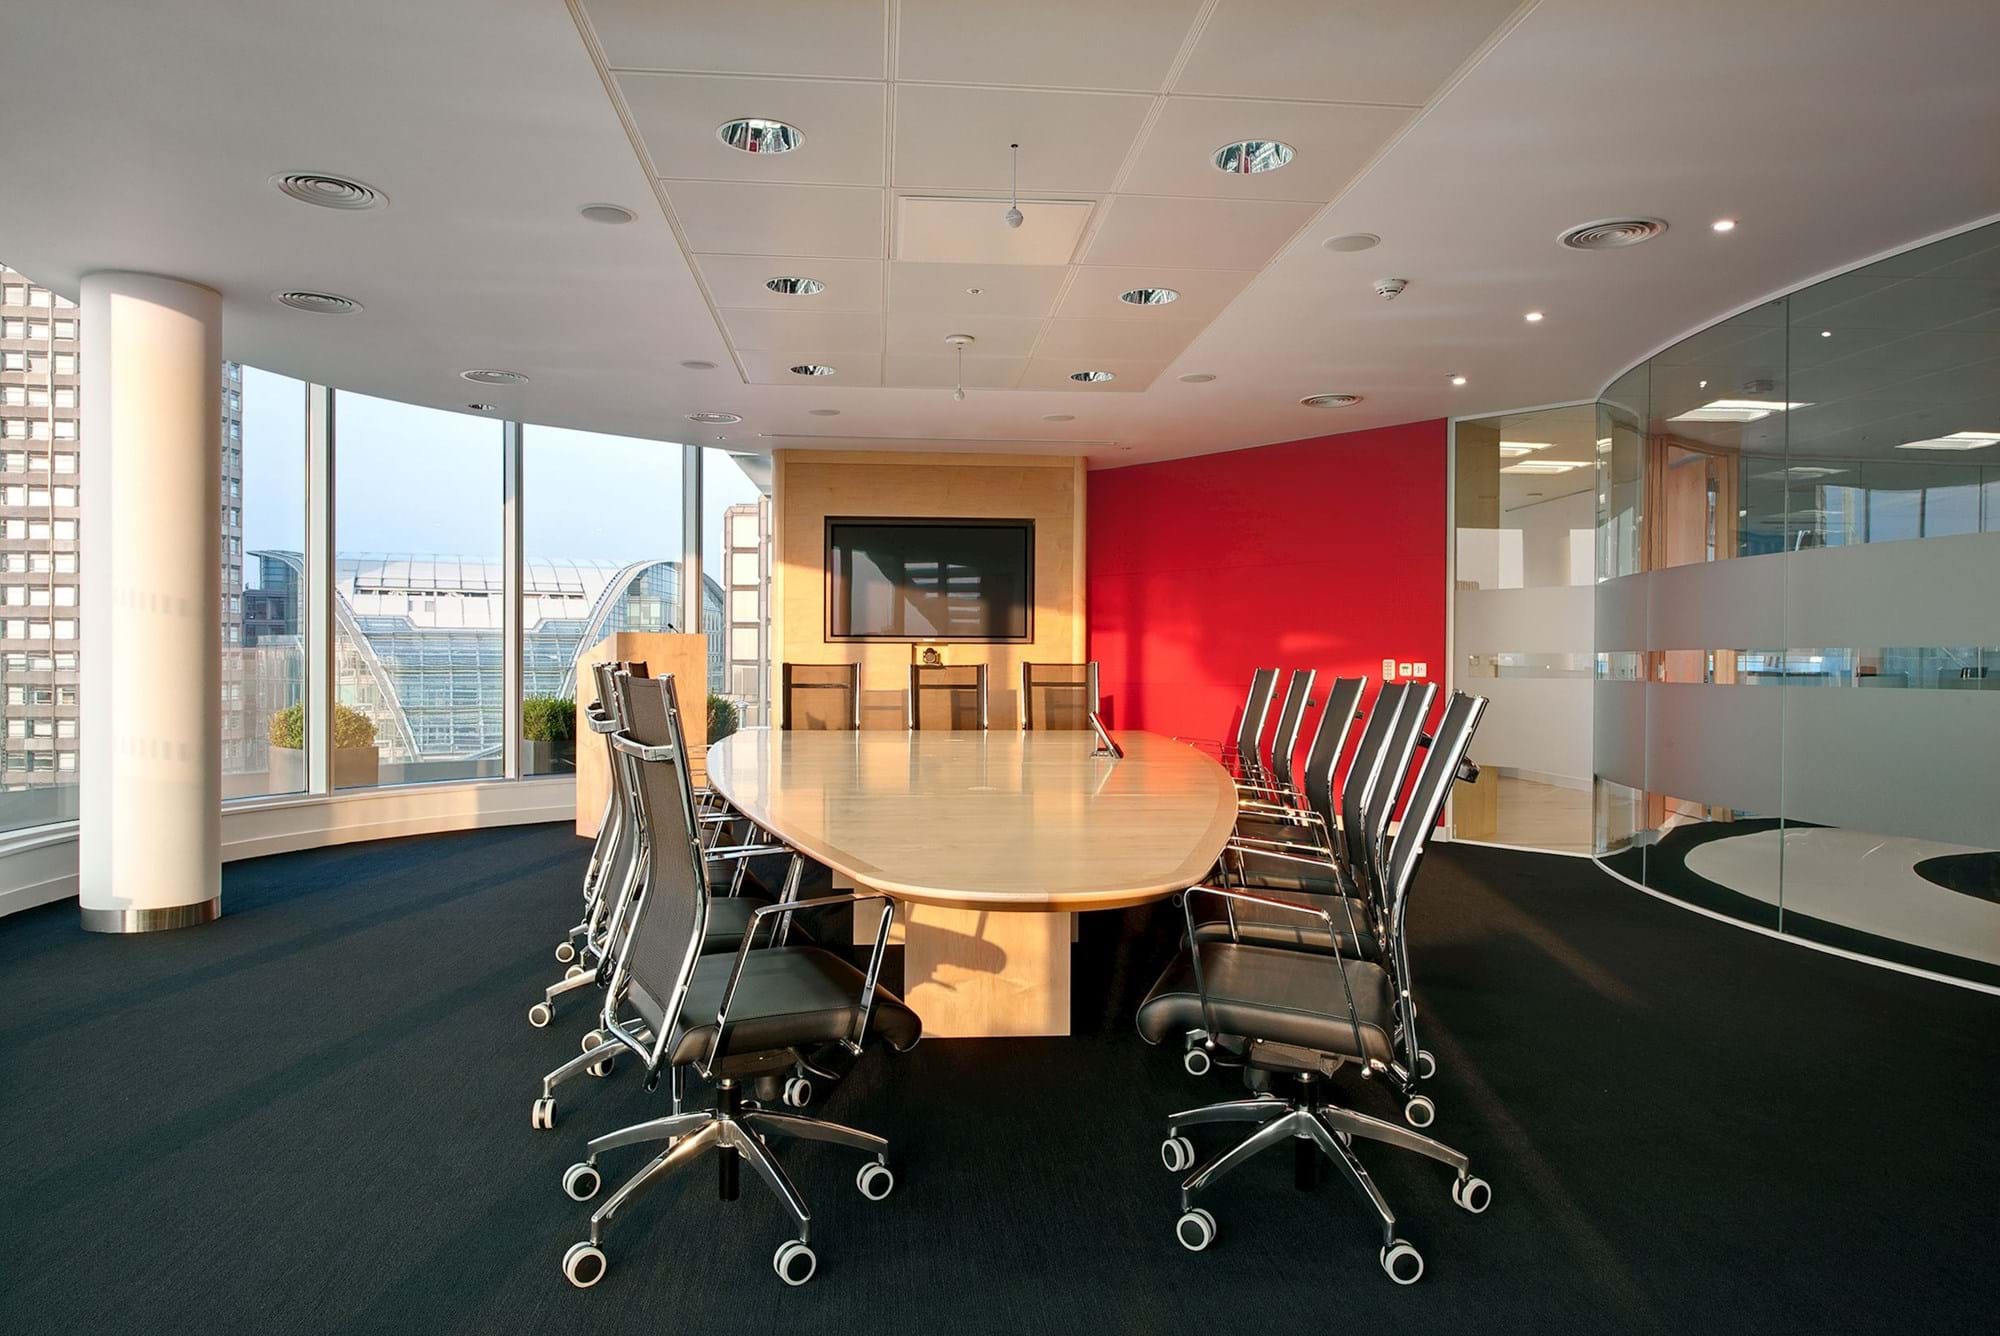 Modus Workspace office design, fit out and refurbishment - G4S - Meeting Room - GS4_05_highres_sRGB.jpg